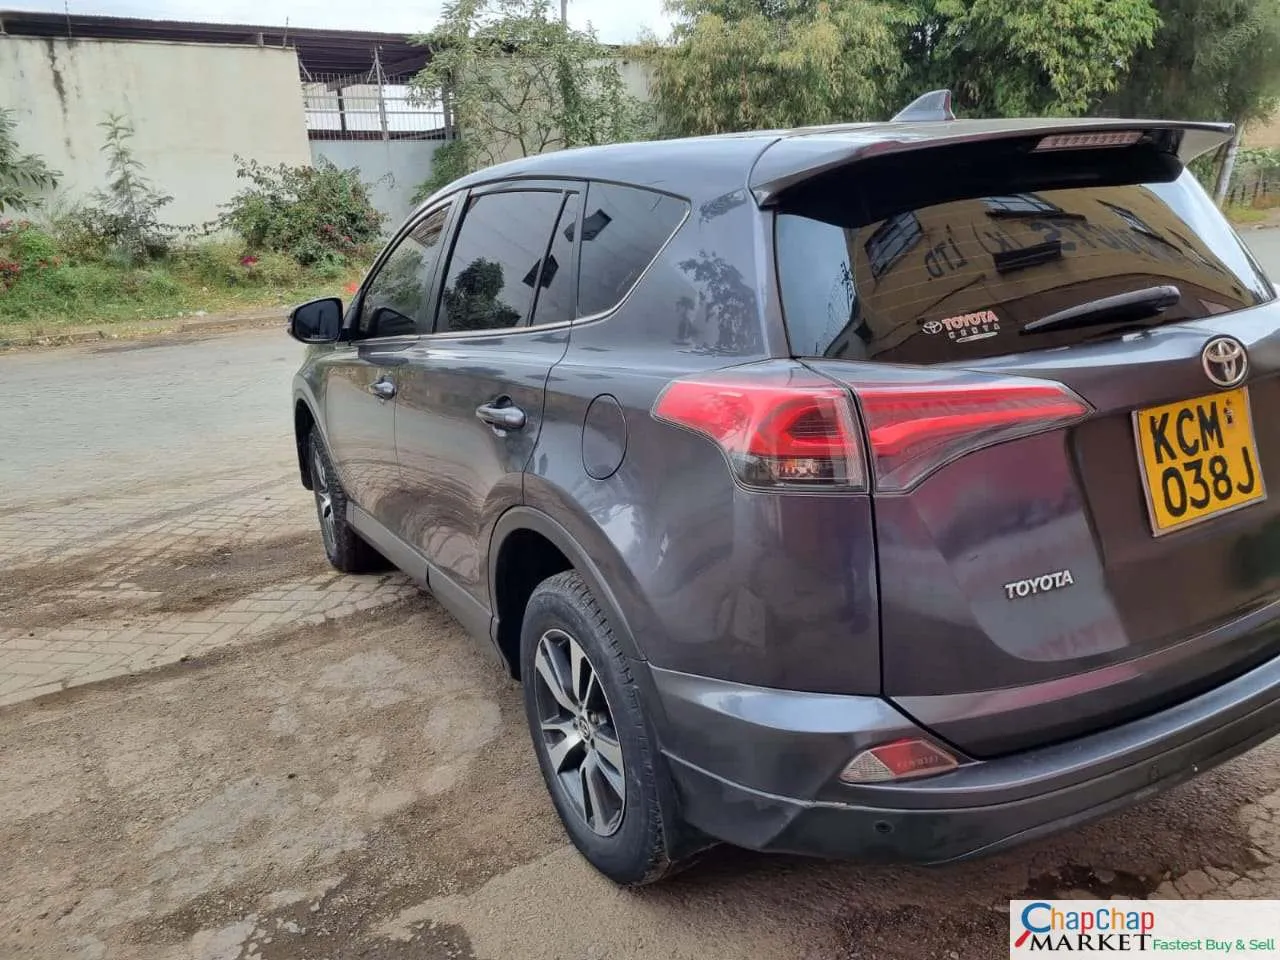 Toyota RAV4 kenya new shape local assembly You Pay 30% Deposit Trade in OK Toyota RAV4 for sale in kenya hire purchase installments EXCLUSIVE